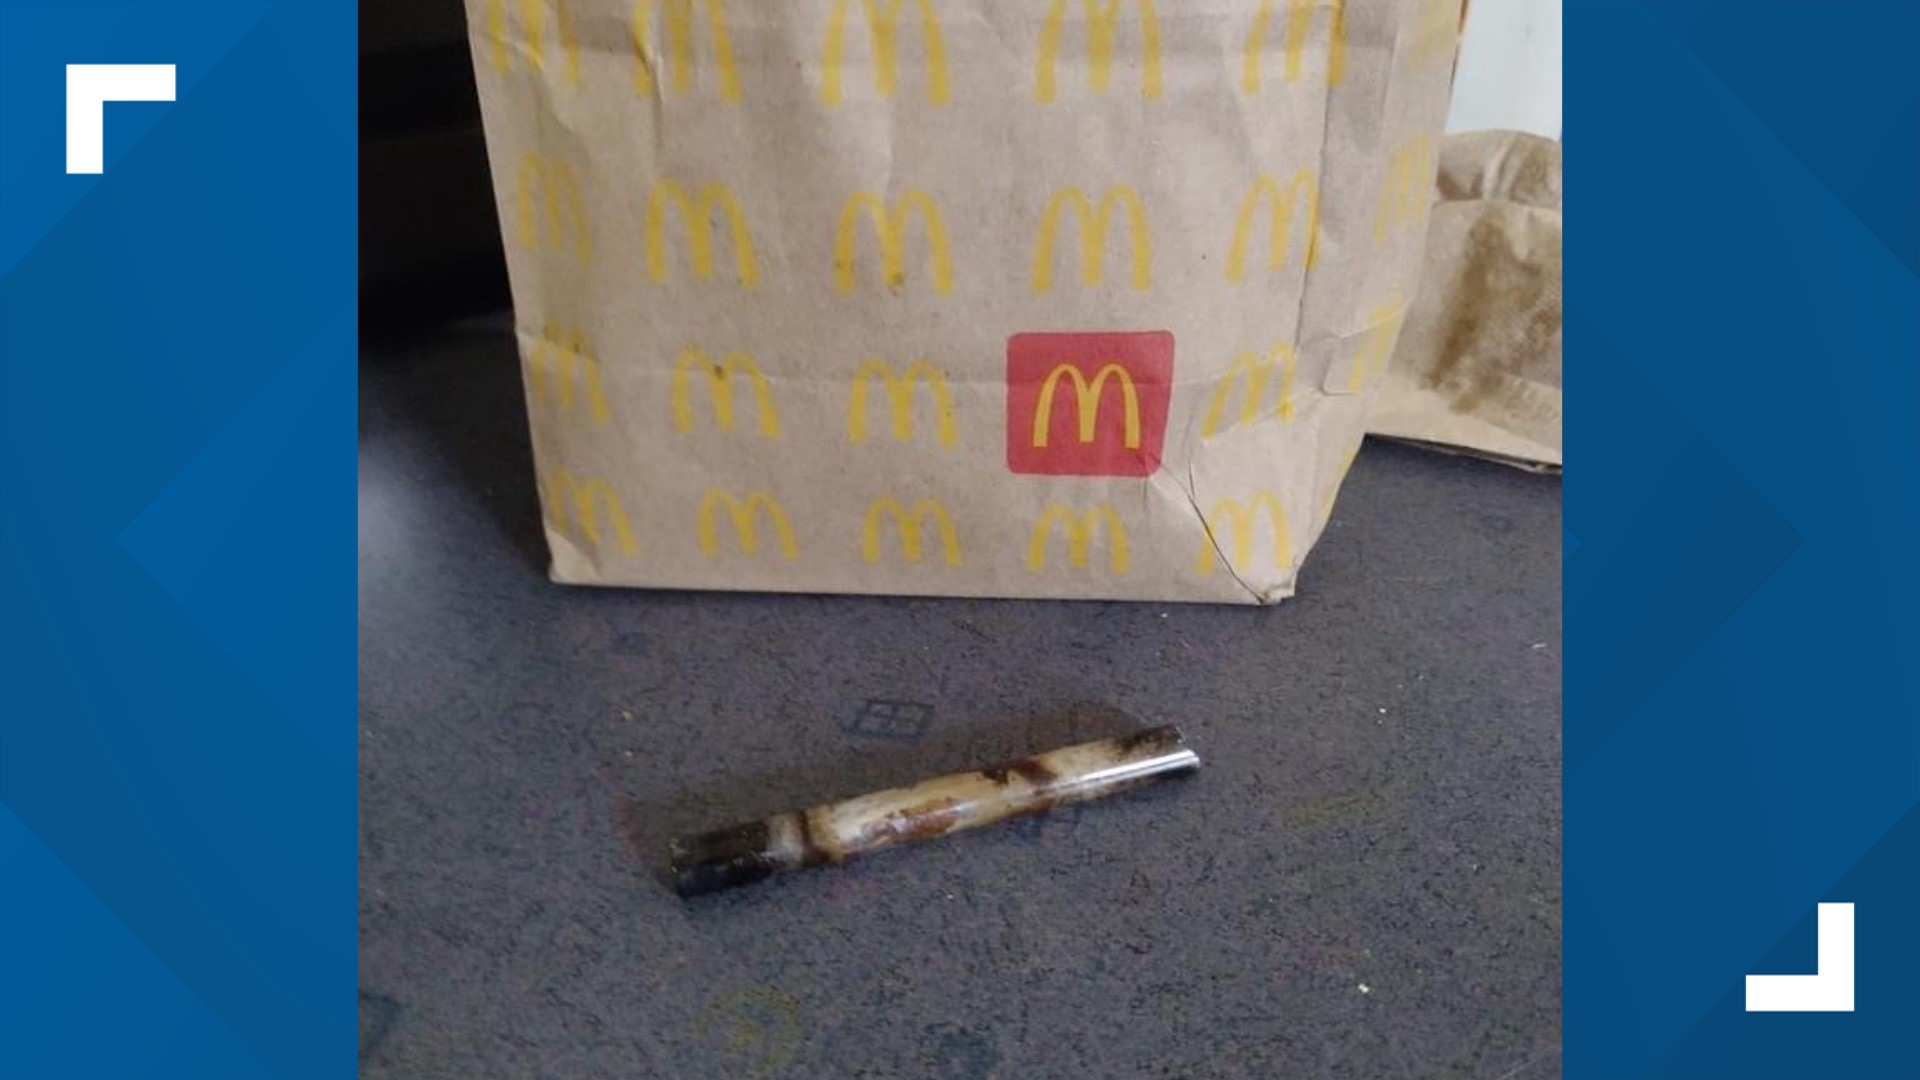 The McDonald's, located at 619 Harrisburg Pike, received a complaint from a customer Tuesday after they reportedly found a 'crack pipe' in their bag.